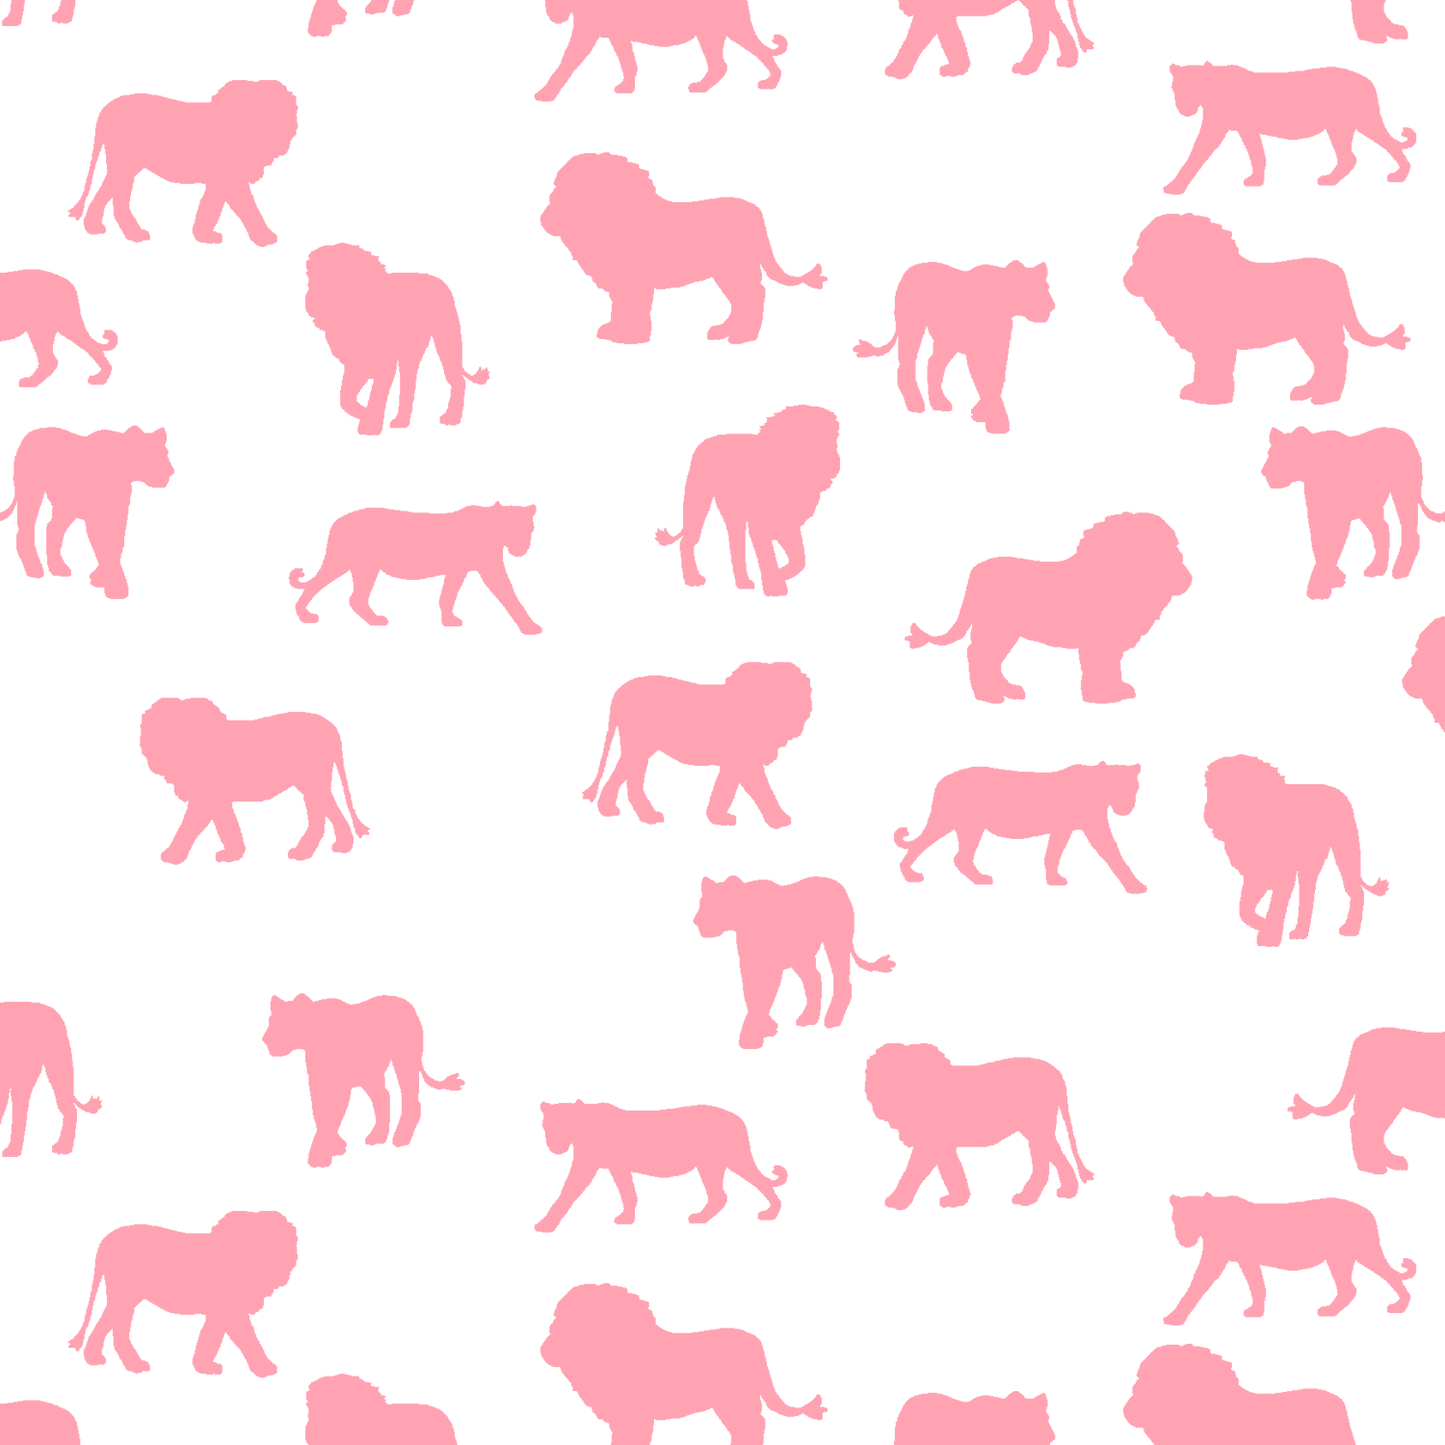 Lion Silhouette in Rose Pink on White